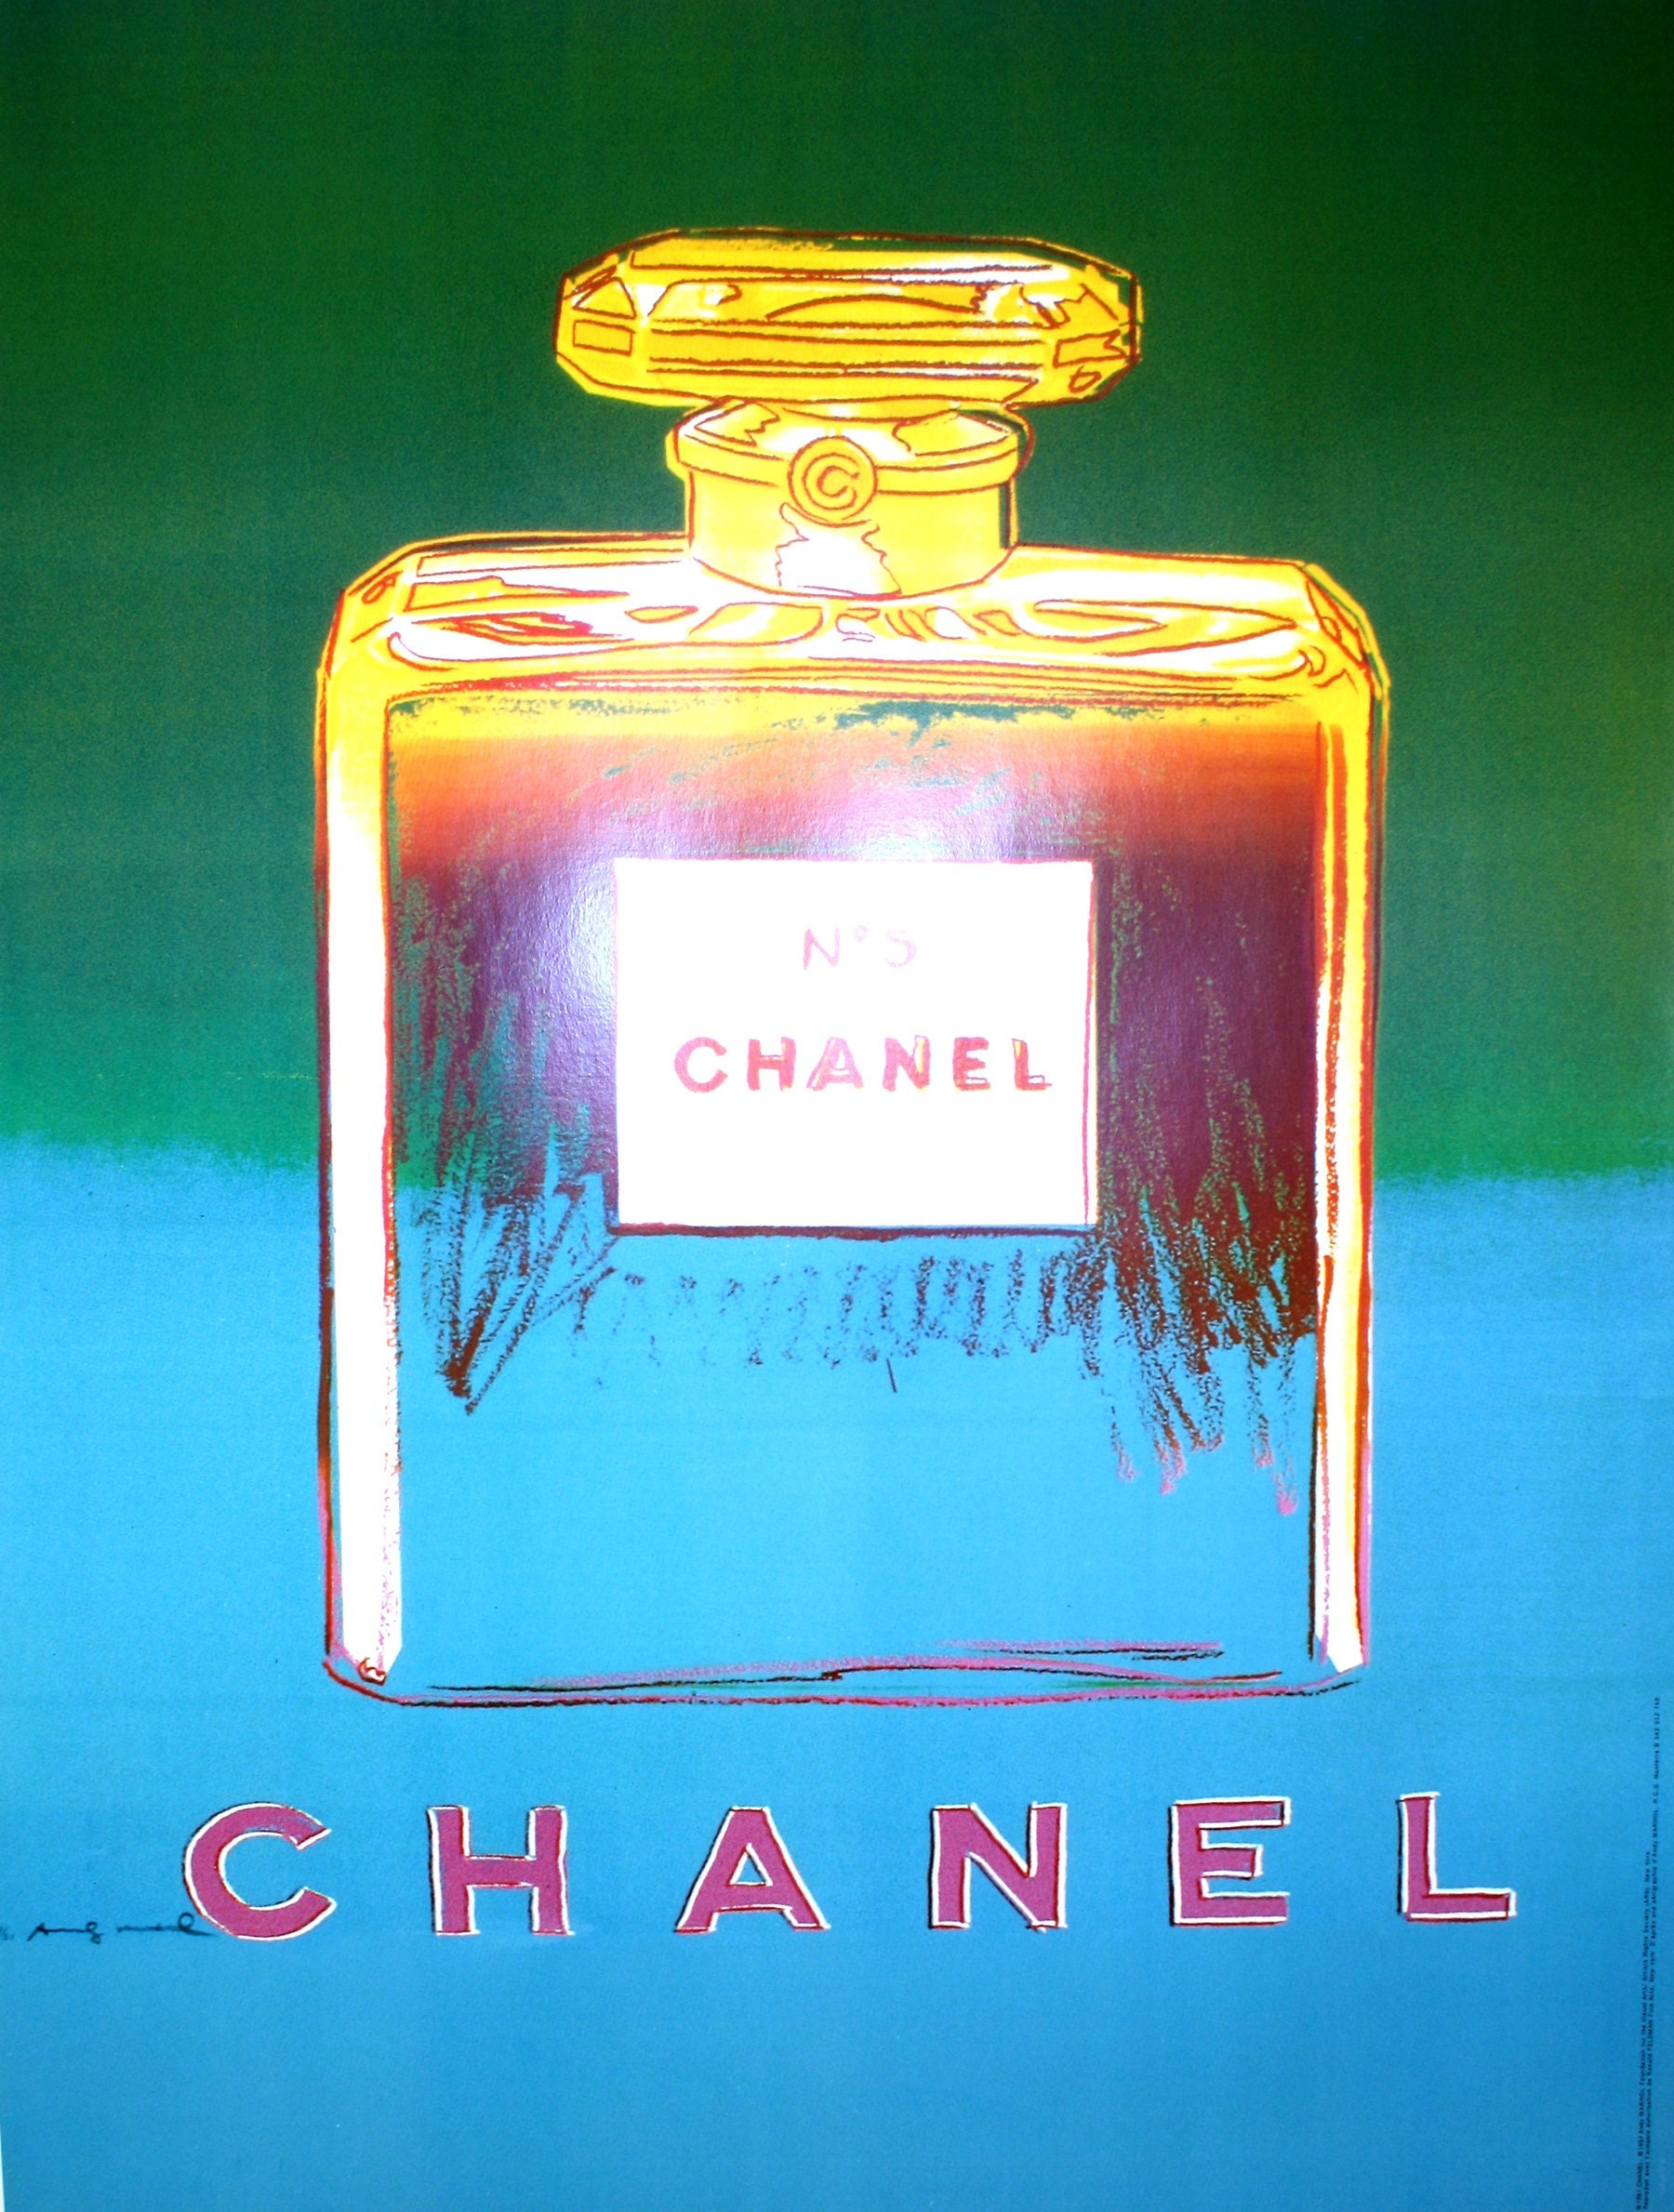 Chanel Perfume Poster posters & prints by Kritsanee Wannawat